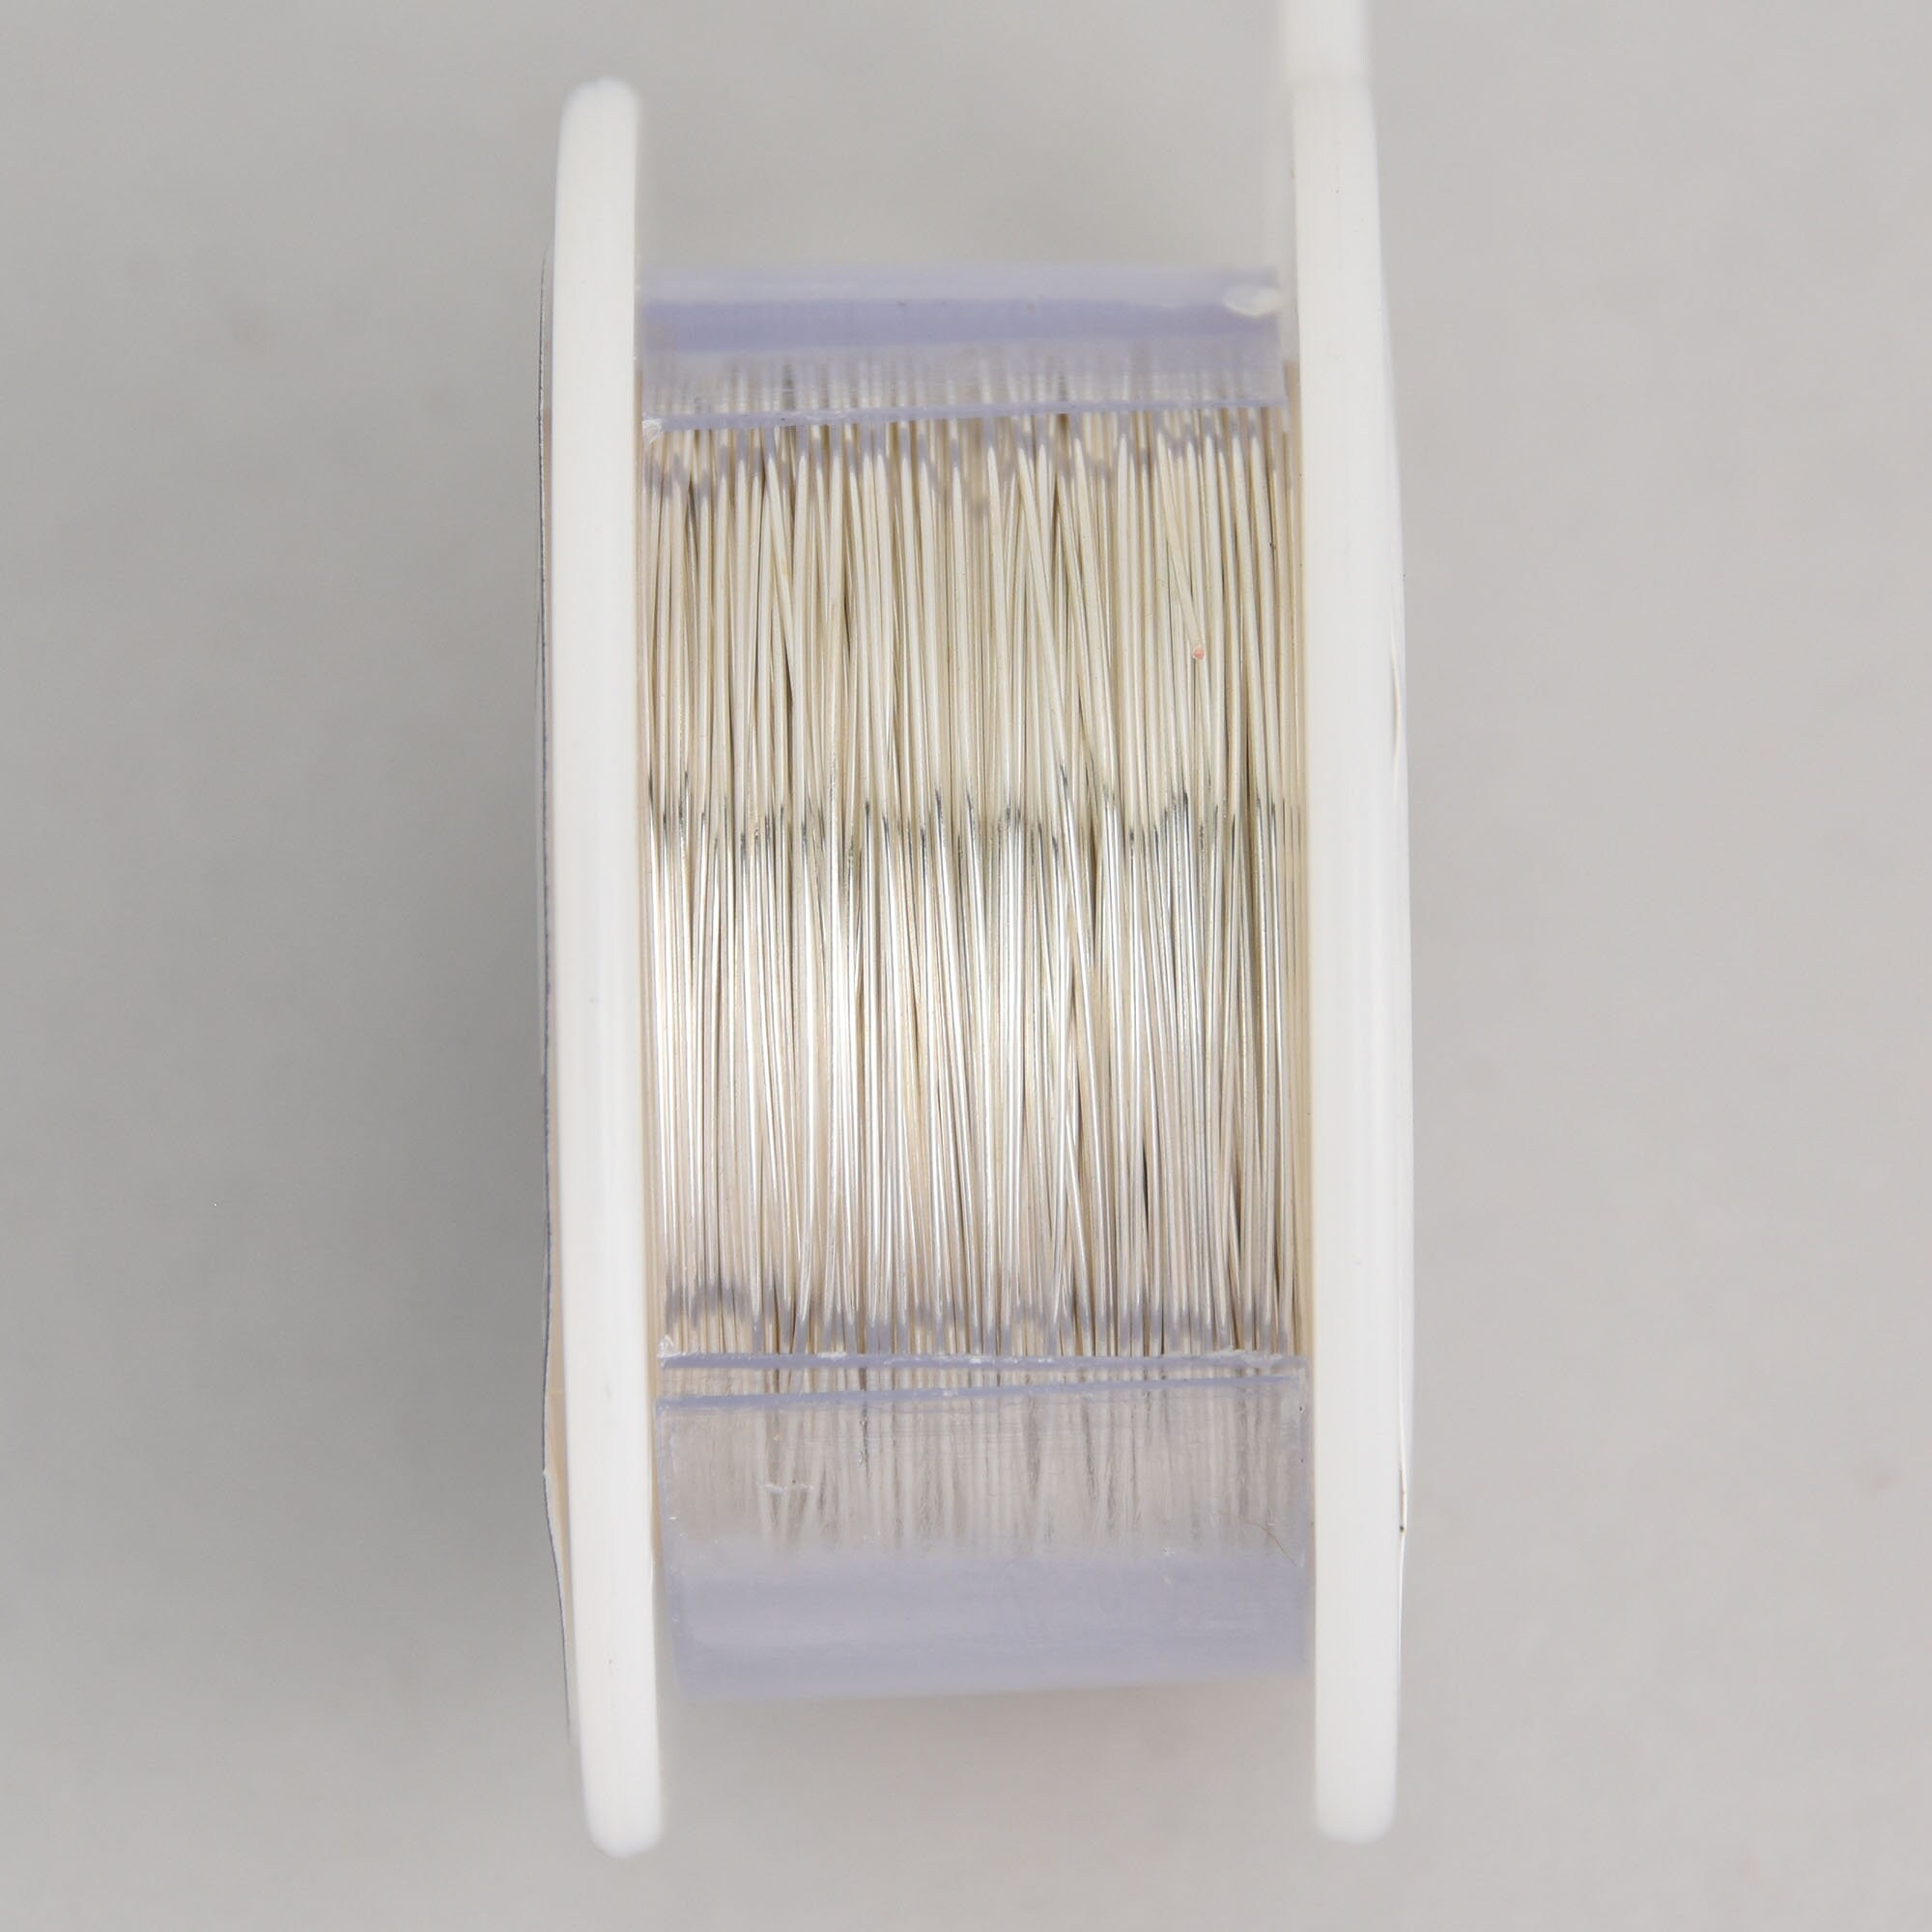 Stainless steel wire ~ 0.7mm Stainless steel jewellery wire ~ 21g stainless  steel wire ~ Jewellery supplies ~ Wire wrapping ~ Jewelry wire